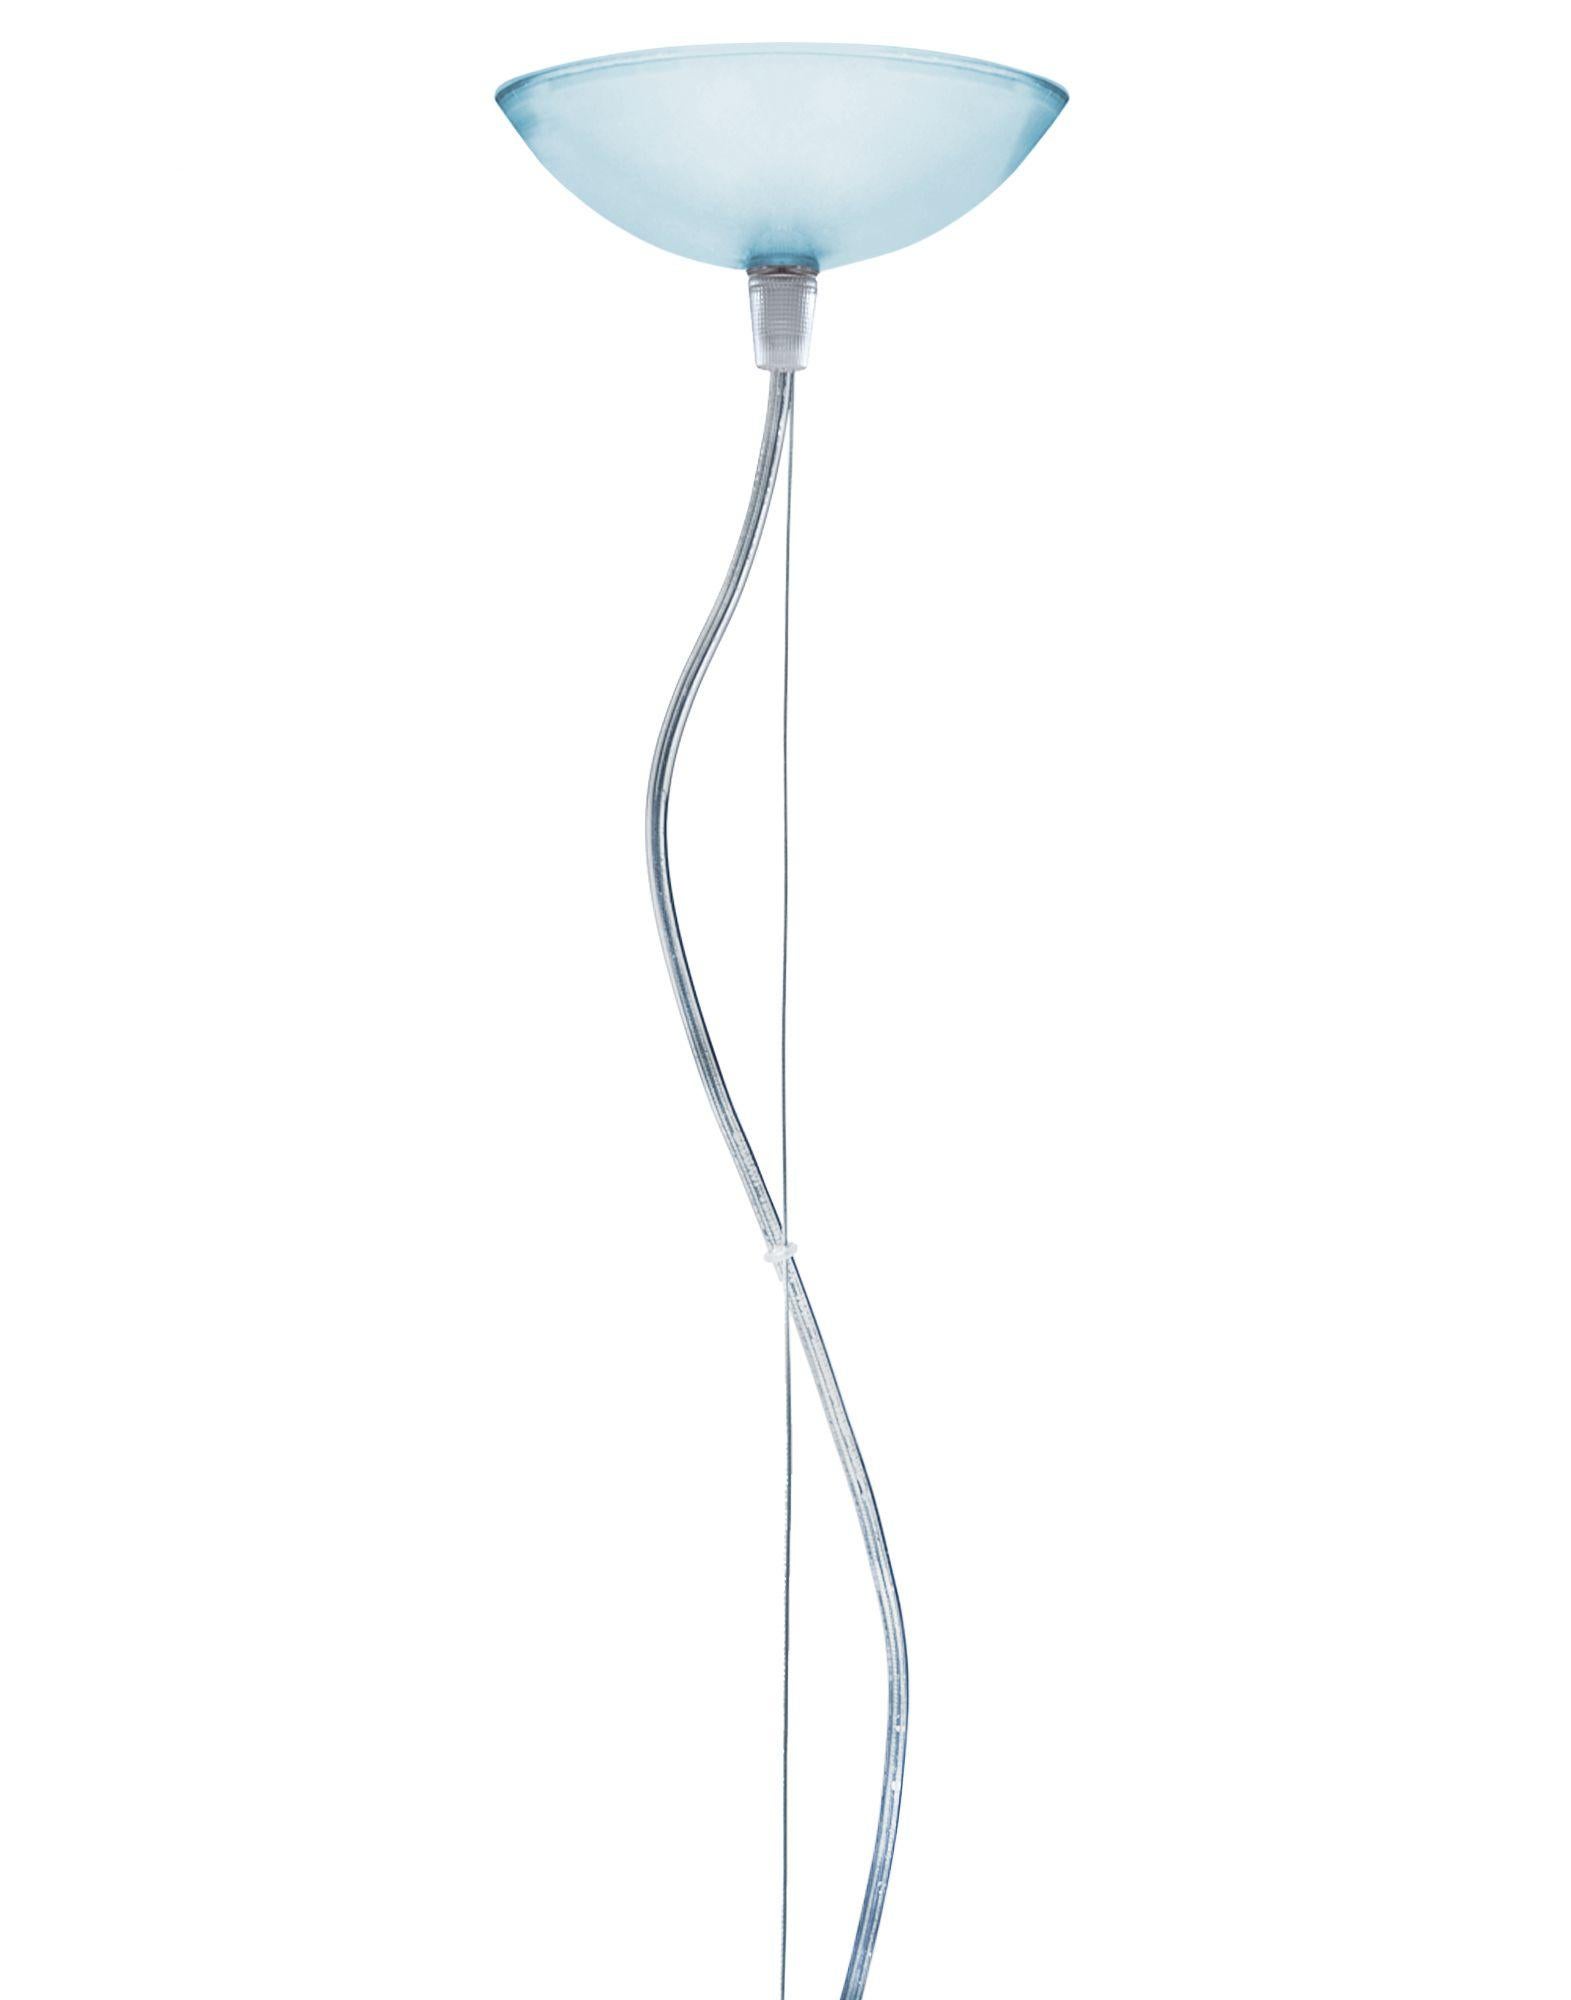 FL/Y pendant light small in sky blue. It is a collection of pendant lamps designed by Ferruccio Laviani in 2002.

Dimensions: Shade height: 11 in.; Diameter: 15 in.; Unit weight: 1.08 kg. Made of: PMMA. Assembly required. Voltage: 120. Cord length